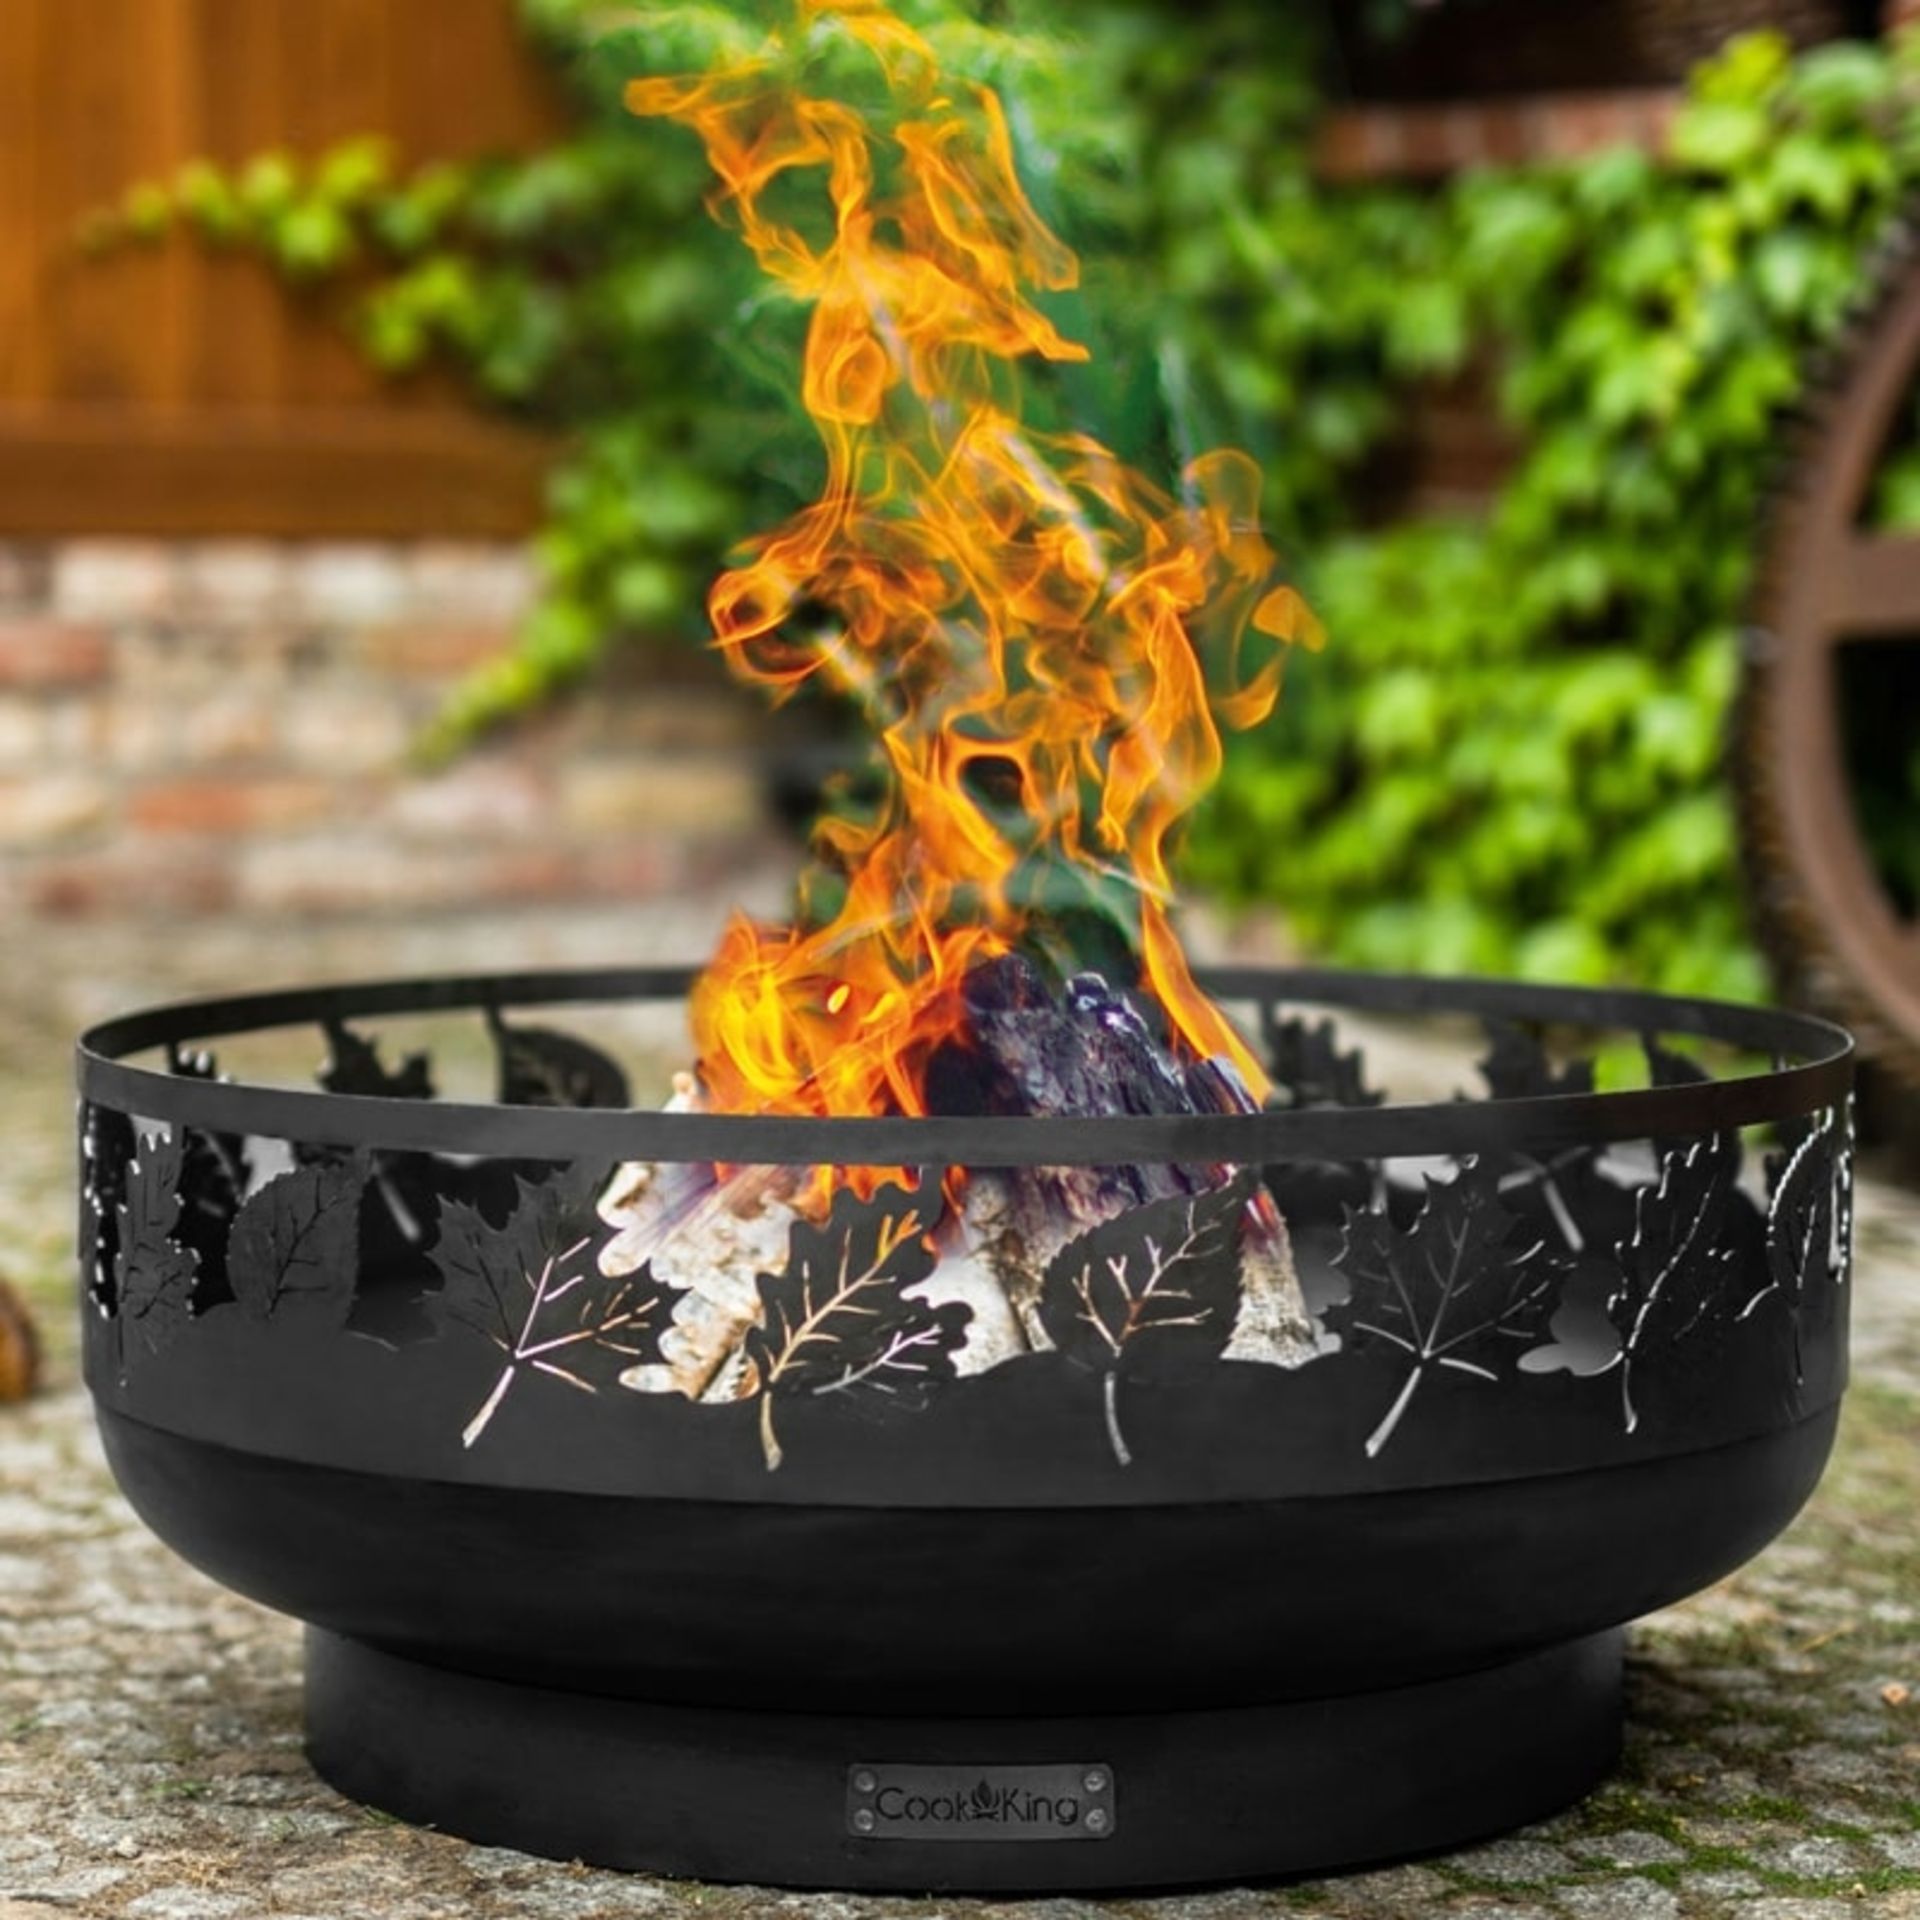 5 x Cook King Toronto 80cm Wood Burning Fire Bowl | 111286 (Please Note: No Original Packaging)